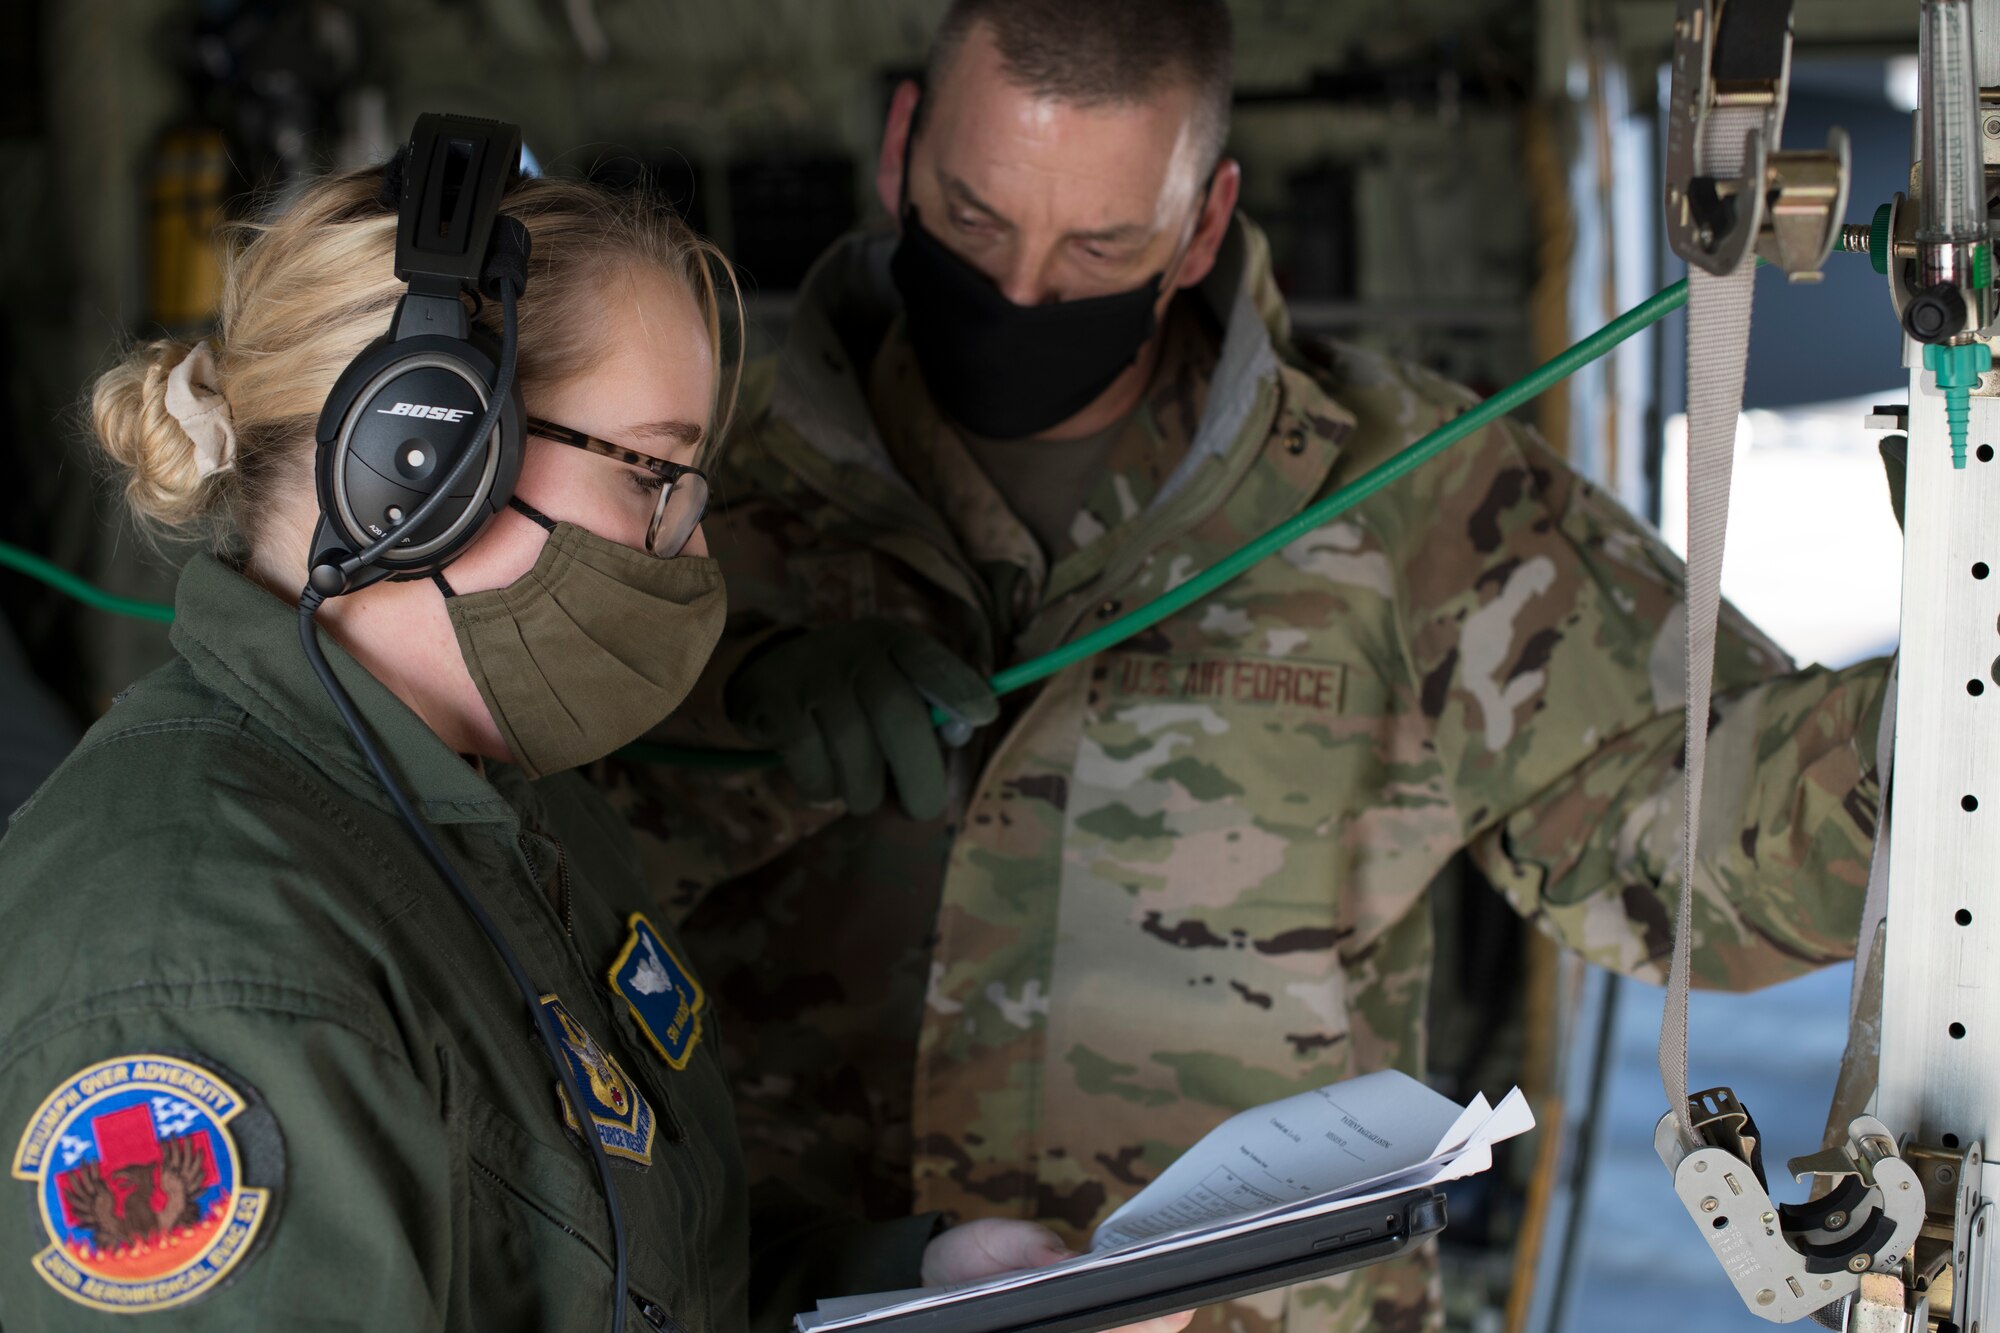 Senior Airman Madison Ross, 36th Aeromedical Evacuation Squadron flight medic, goes over a patient checklist with Senior Master Sgt. Anthony Staut, operations support flight chief for the 36th AES, before an aeromedical evacuation training flight at Keesler Air Force Base, Miss January 13, 2021. Ross is one of six Reservists who will be deploying to either Travis AFB, Calif. or Ramstein Air Base in Germany to assist in transporting and caring for COVID-19 patients. (U.S. Air Force photo by Senior Airman Kristen Pittman)